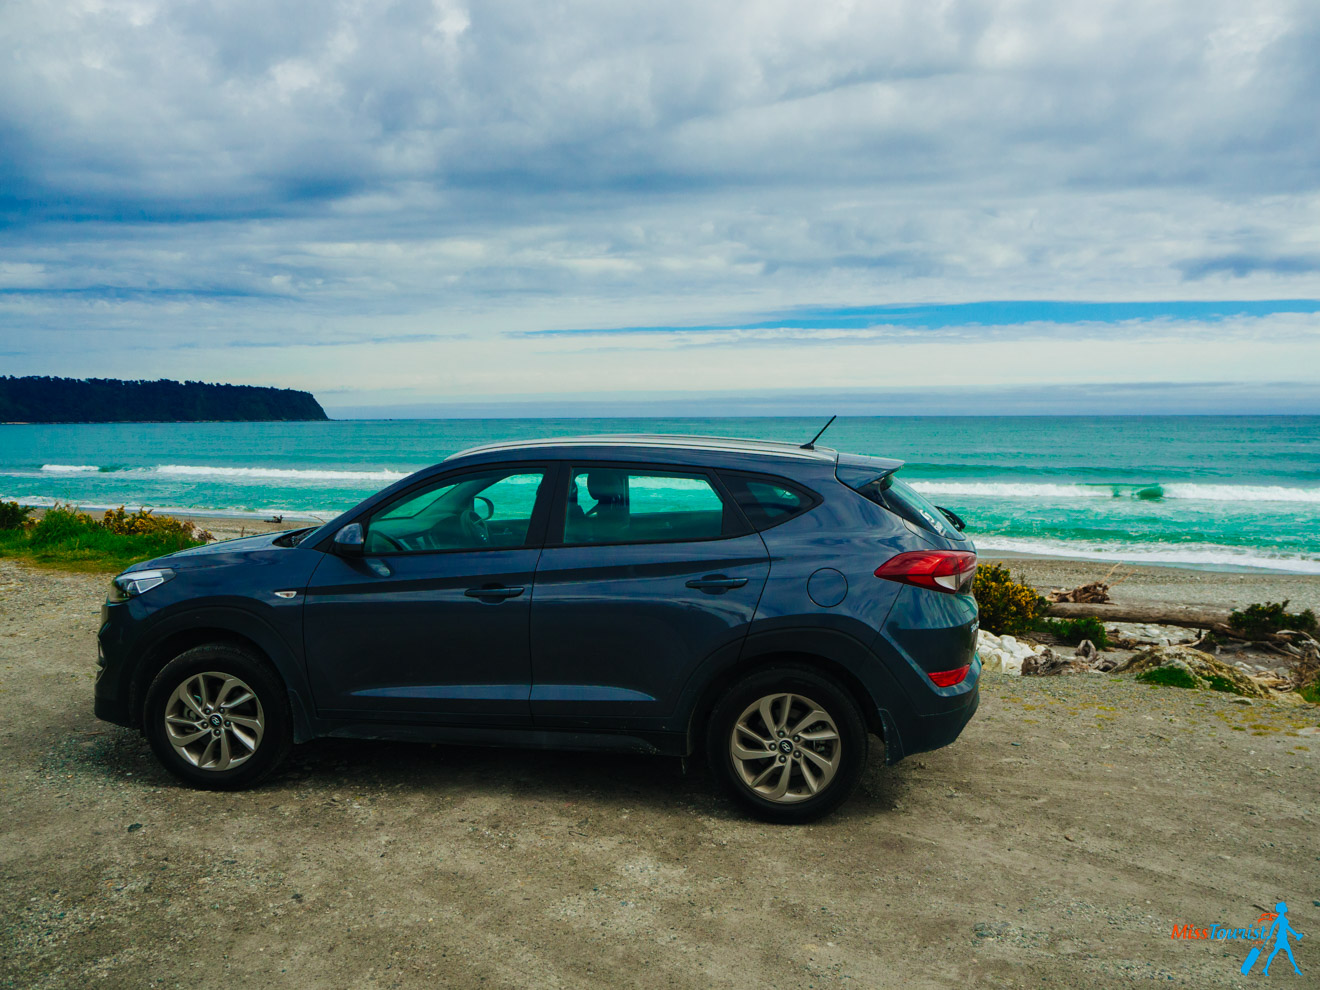 7 things you should know before renting a car in New Zealand 5